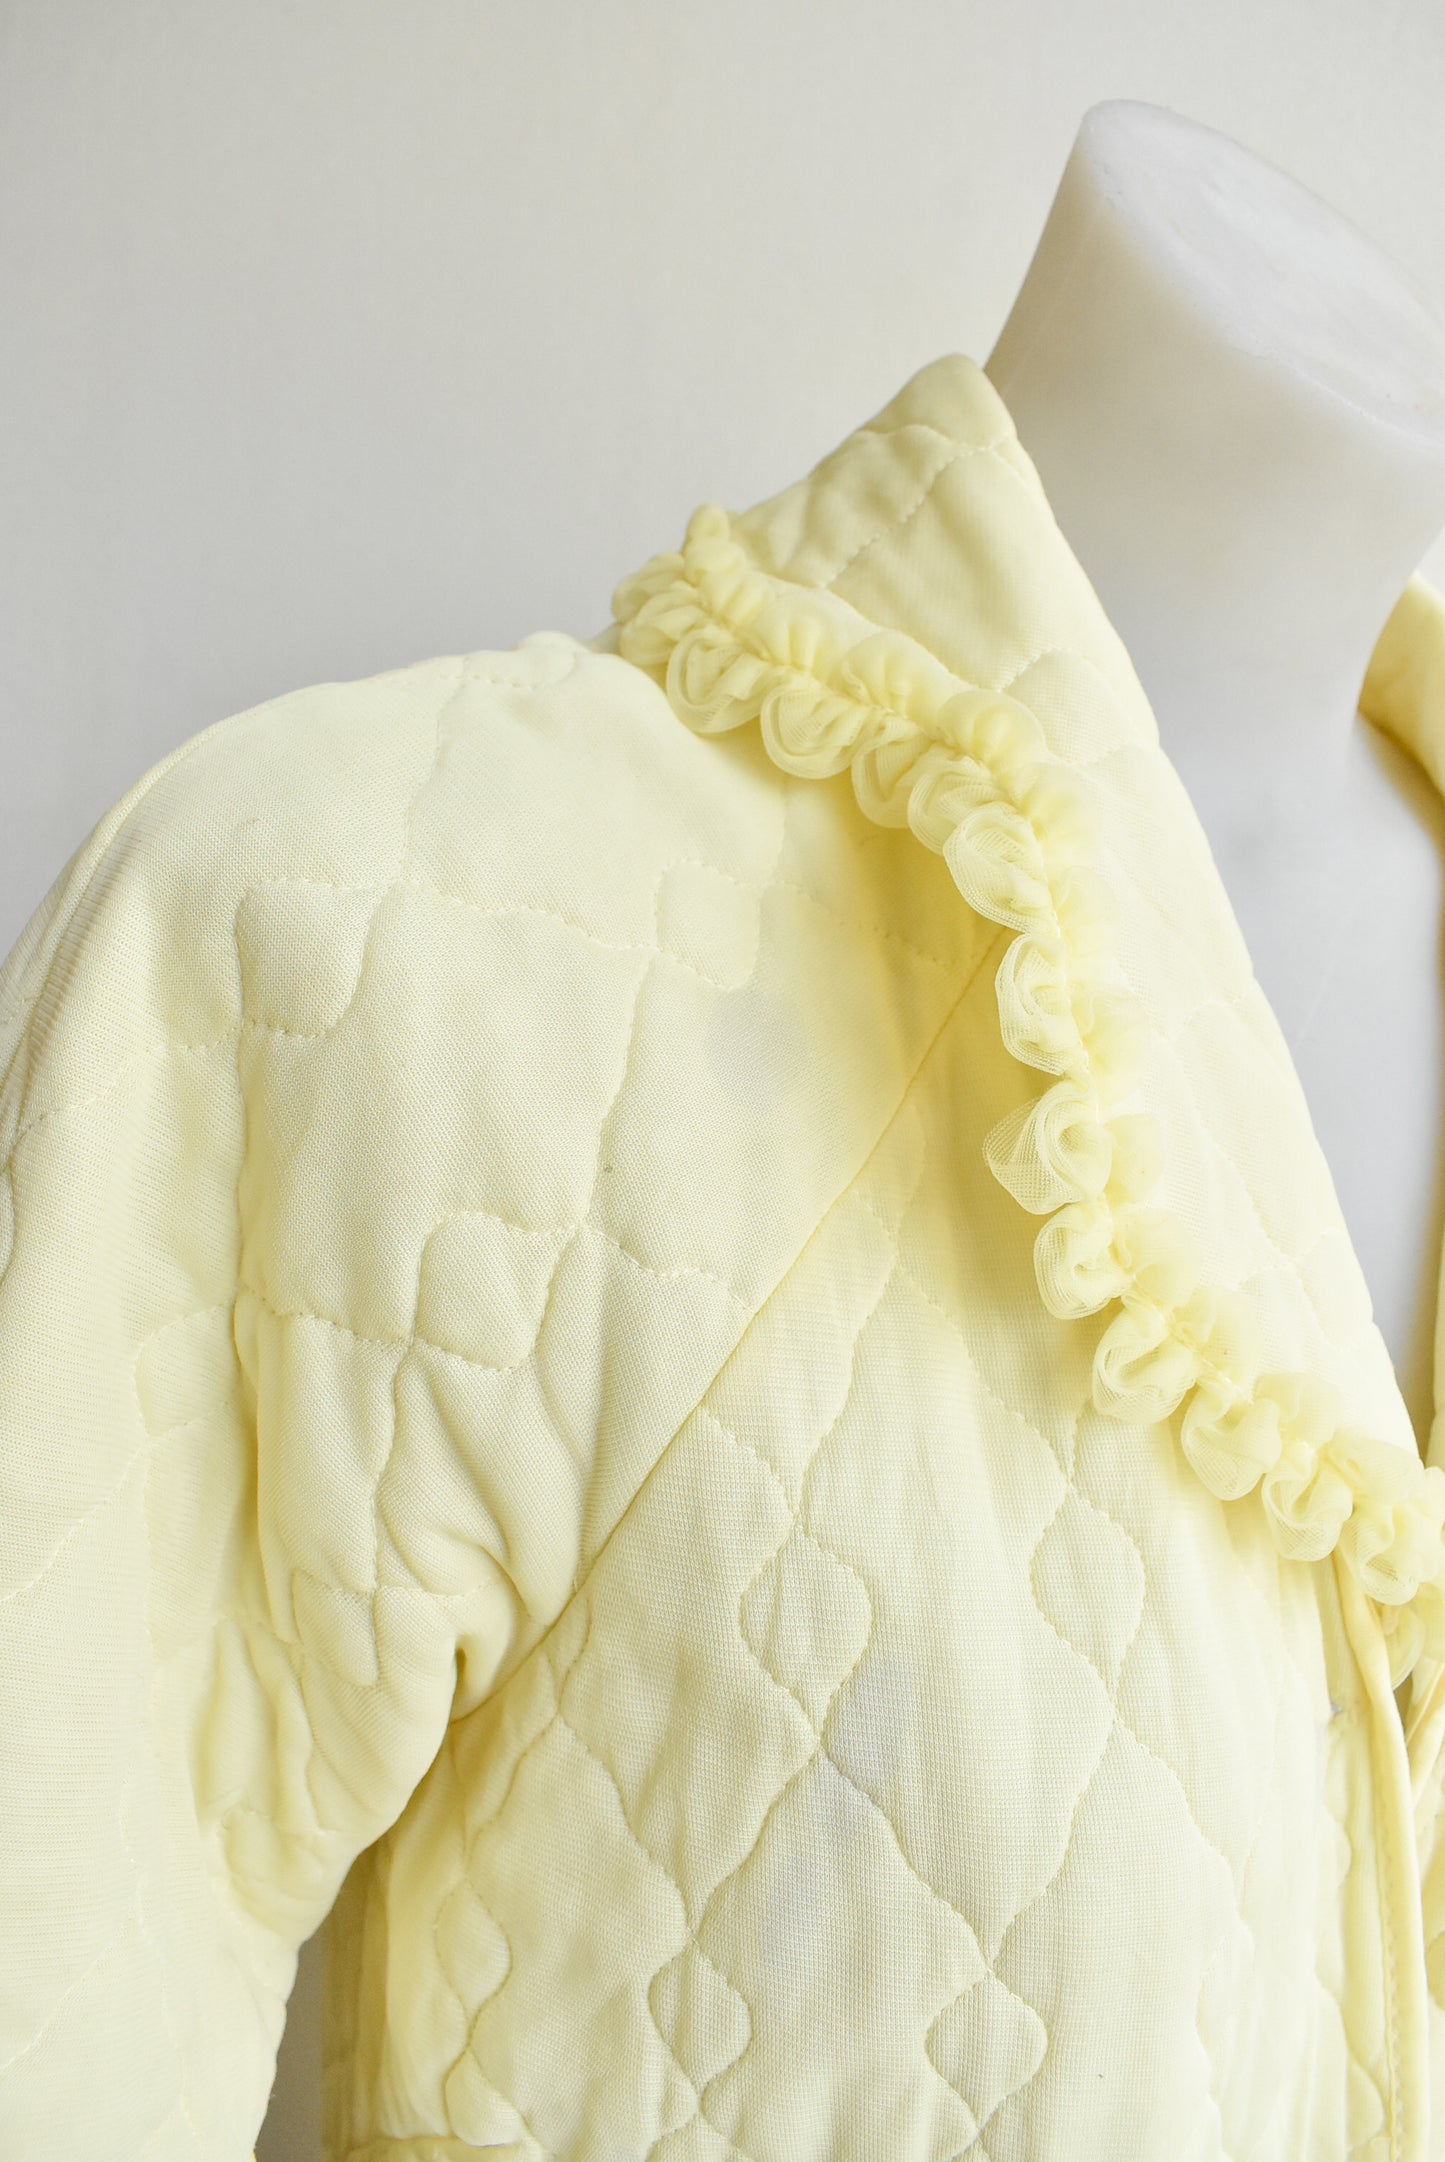 Vintage Yellow dressing gown, size SW (vintage womens small)